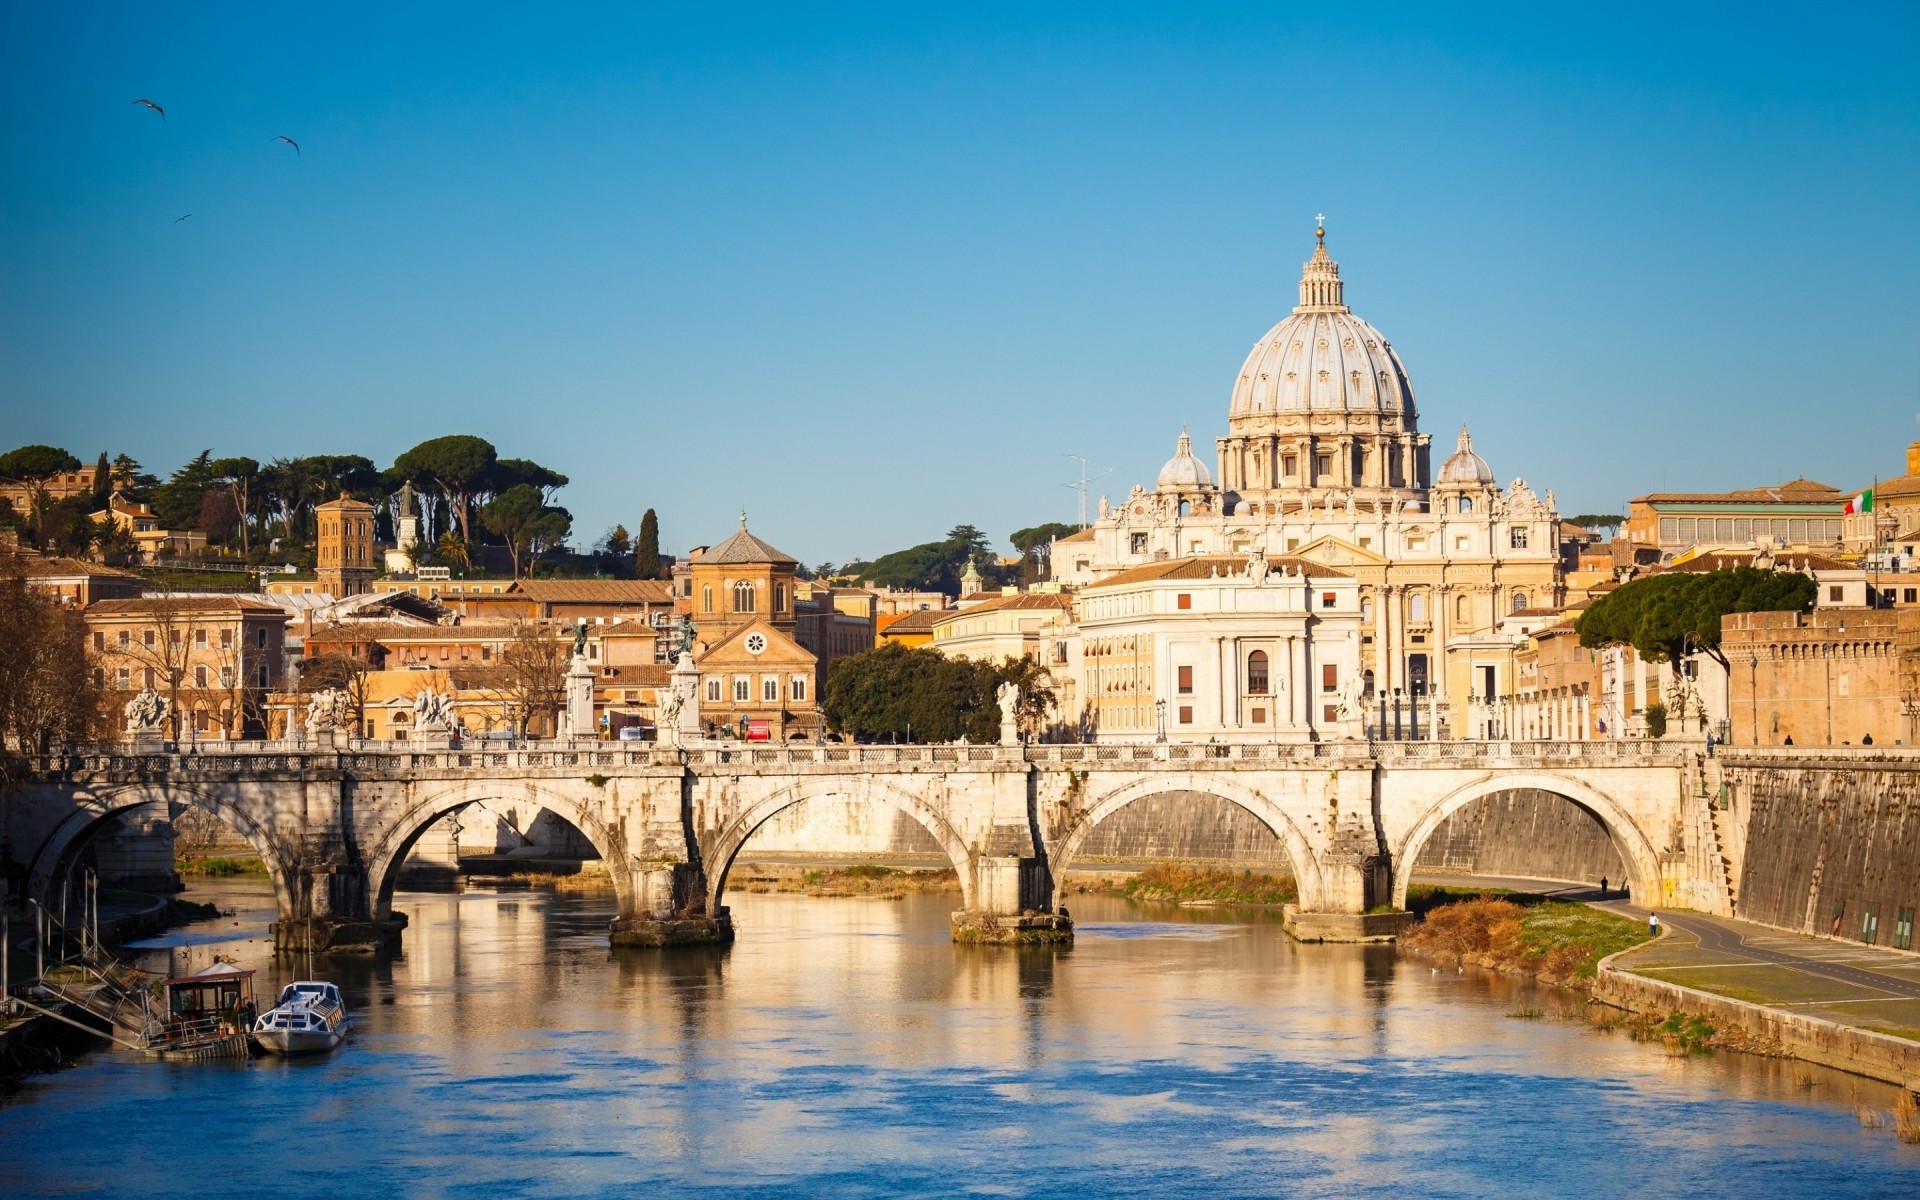 italy architecture city building travel church water landmark bridge river cityscape cathedral town tourism dome old sky urban ancient outdoors rome boat landscape